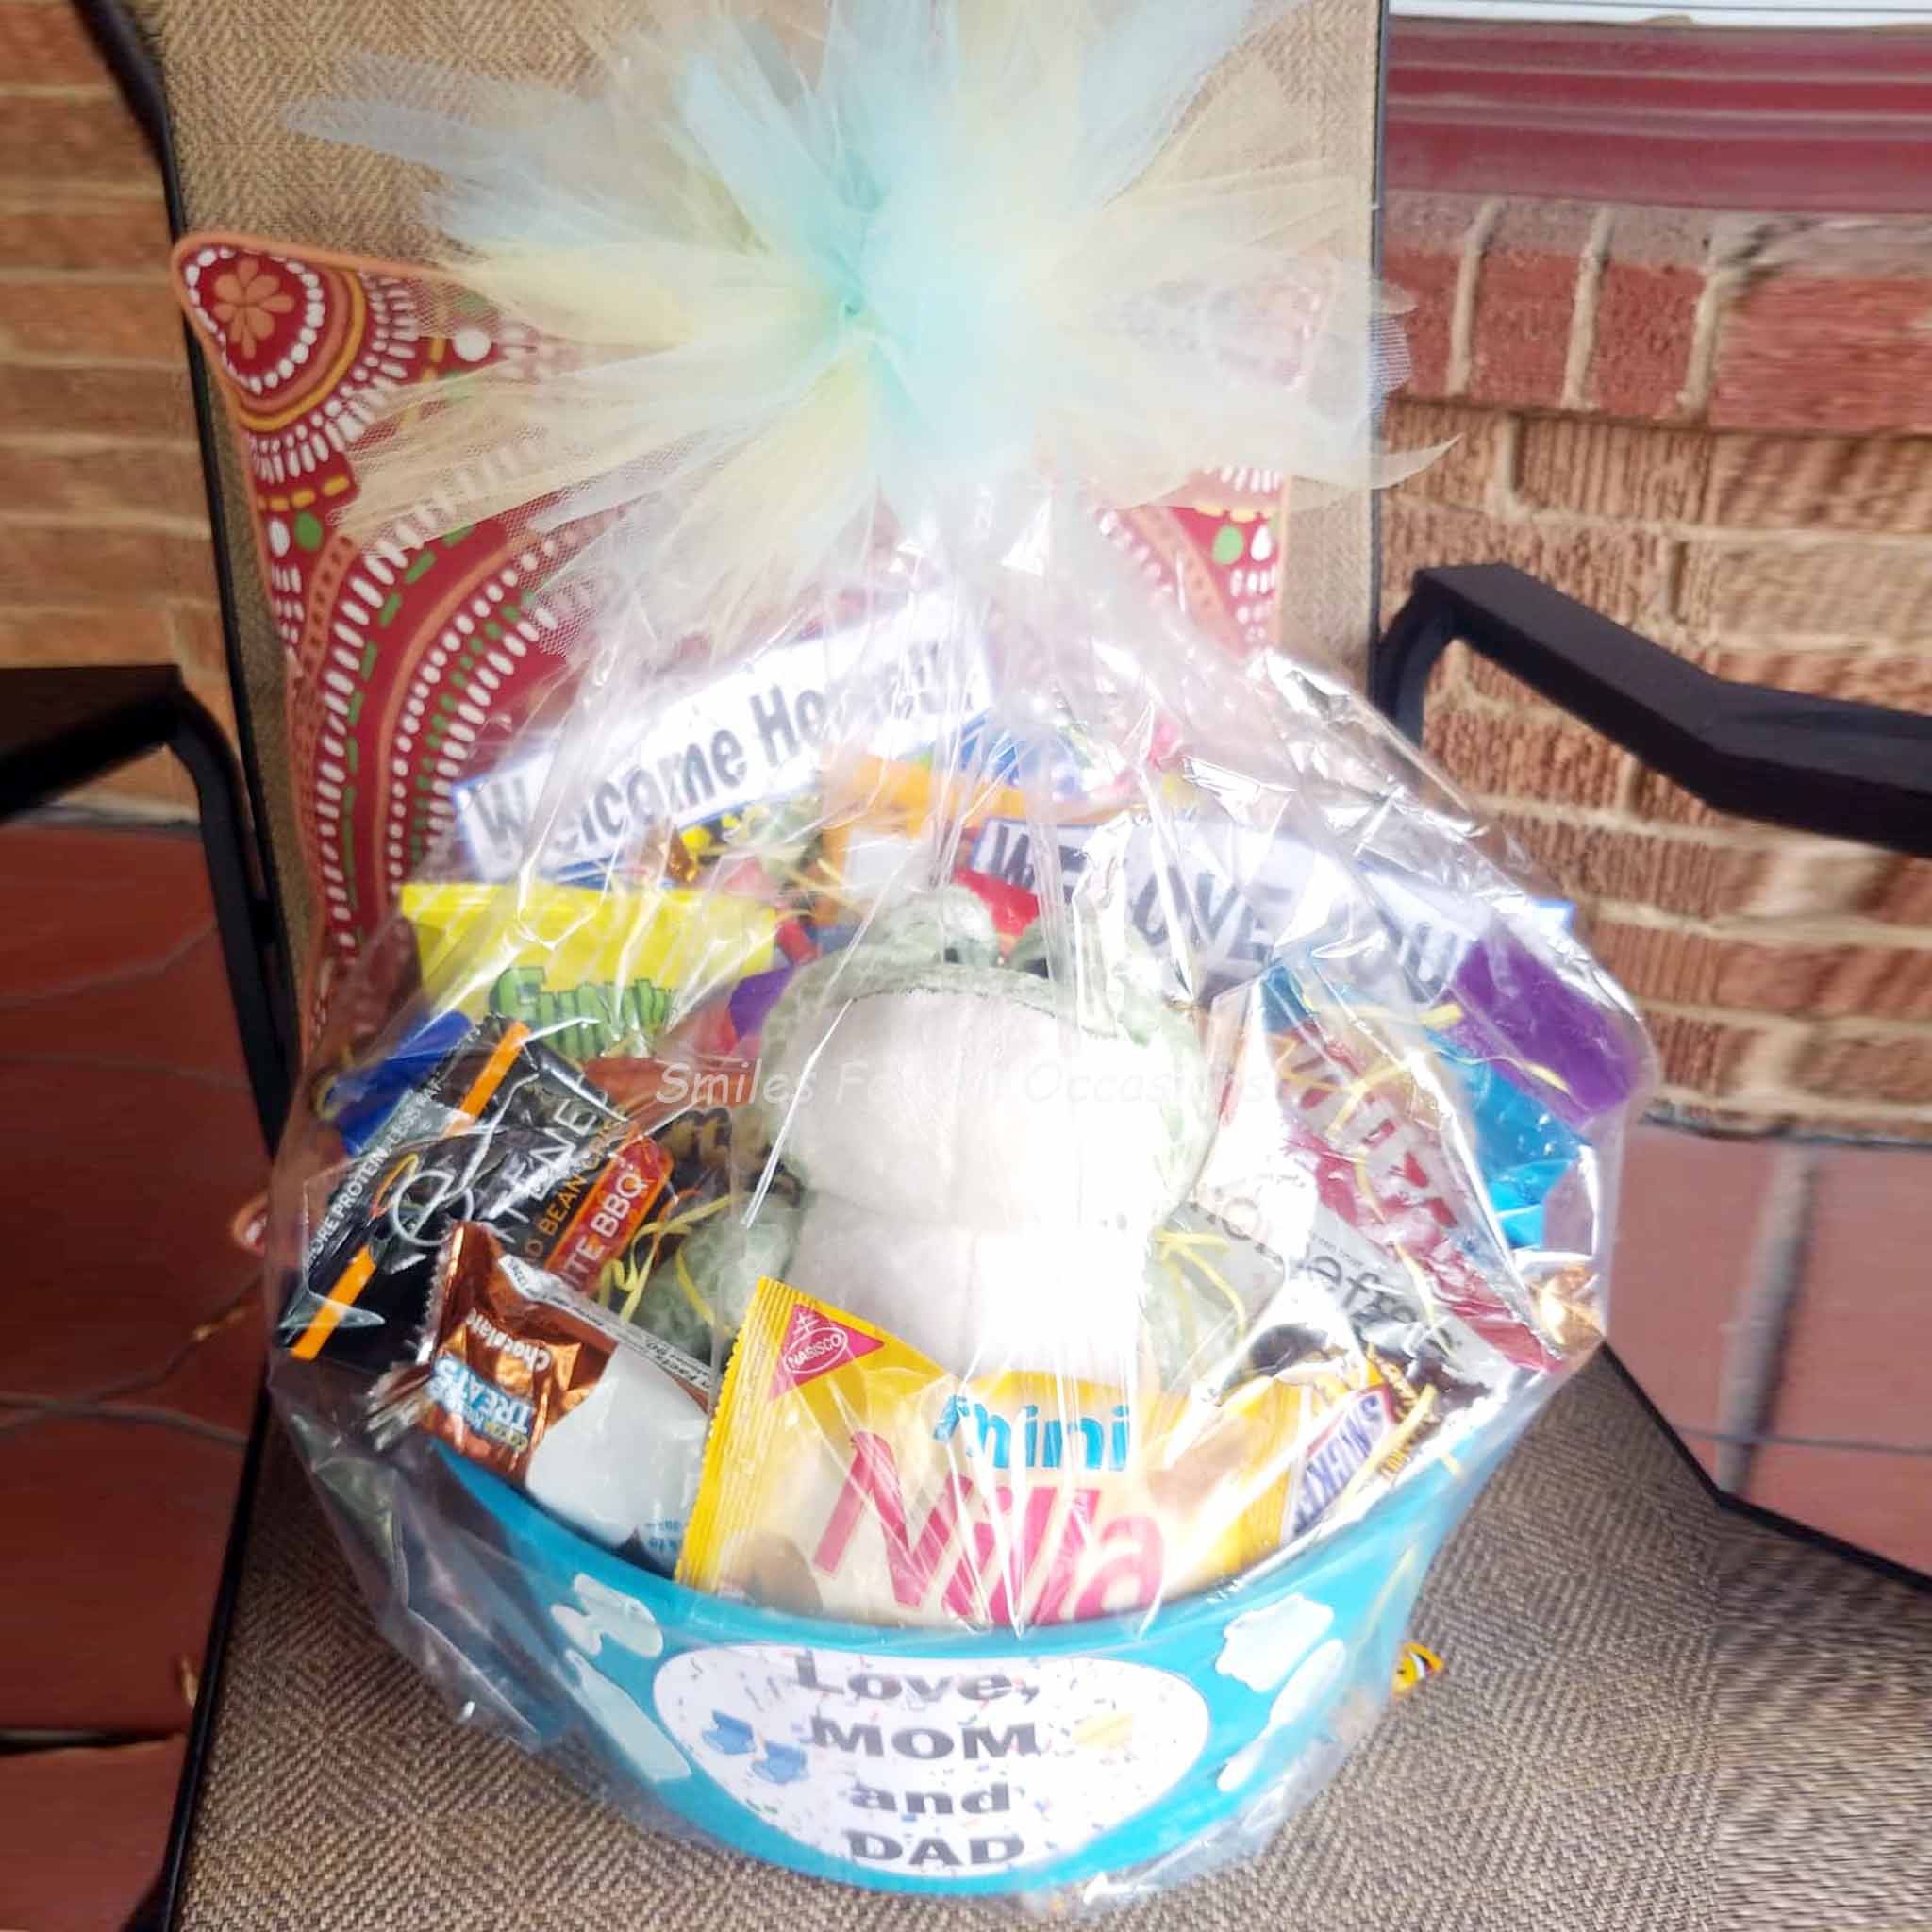 Candy and Snack Gift Basket